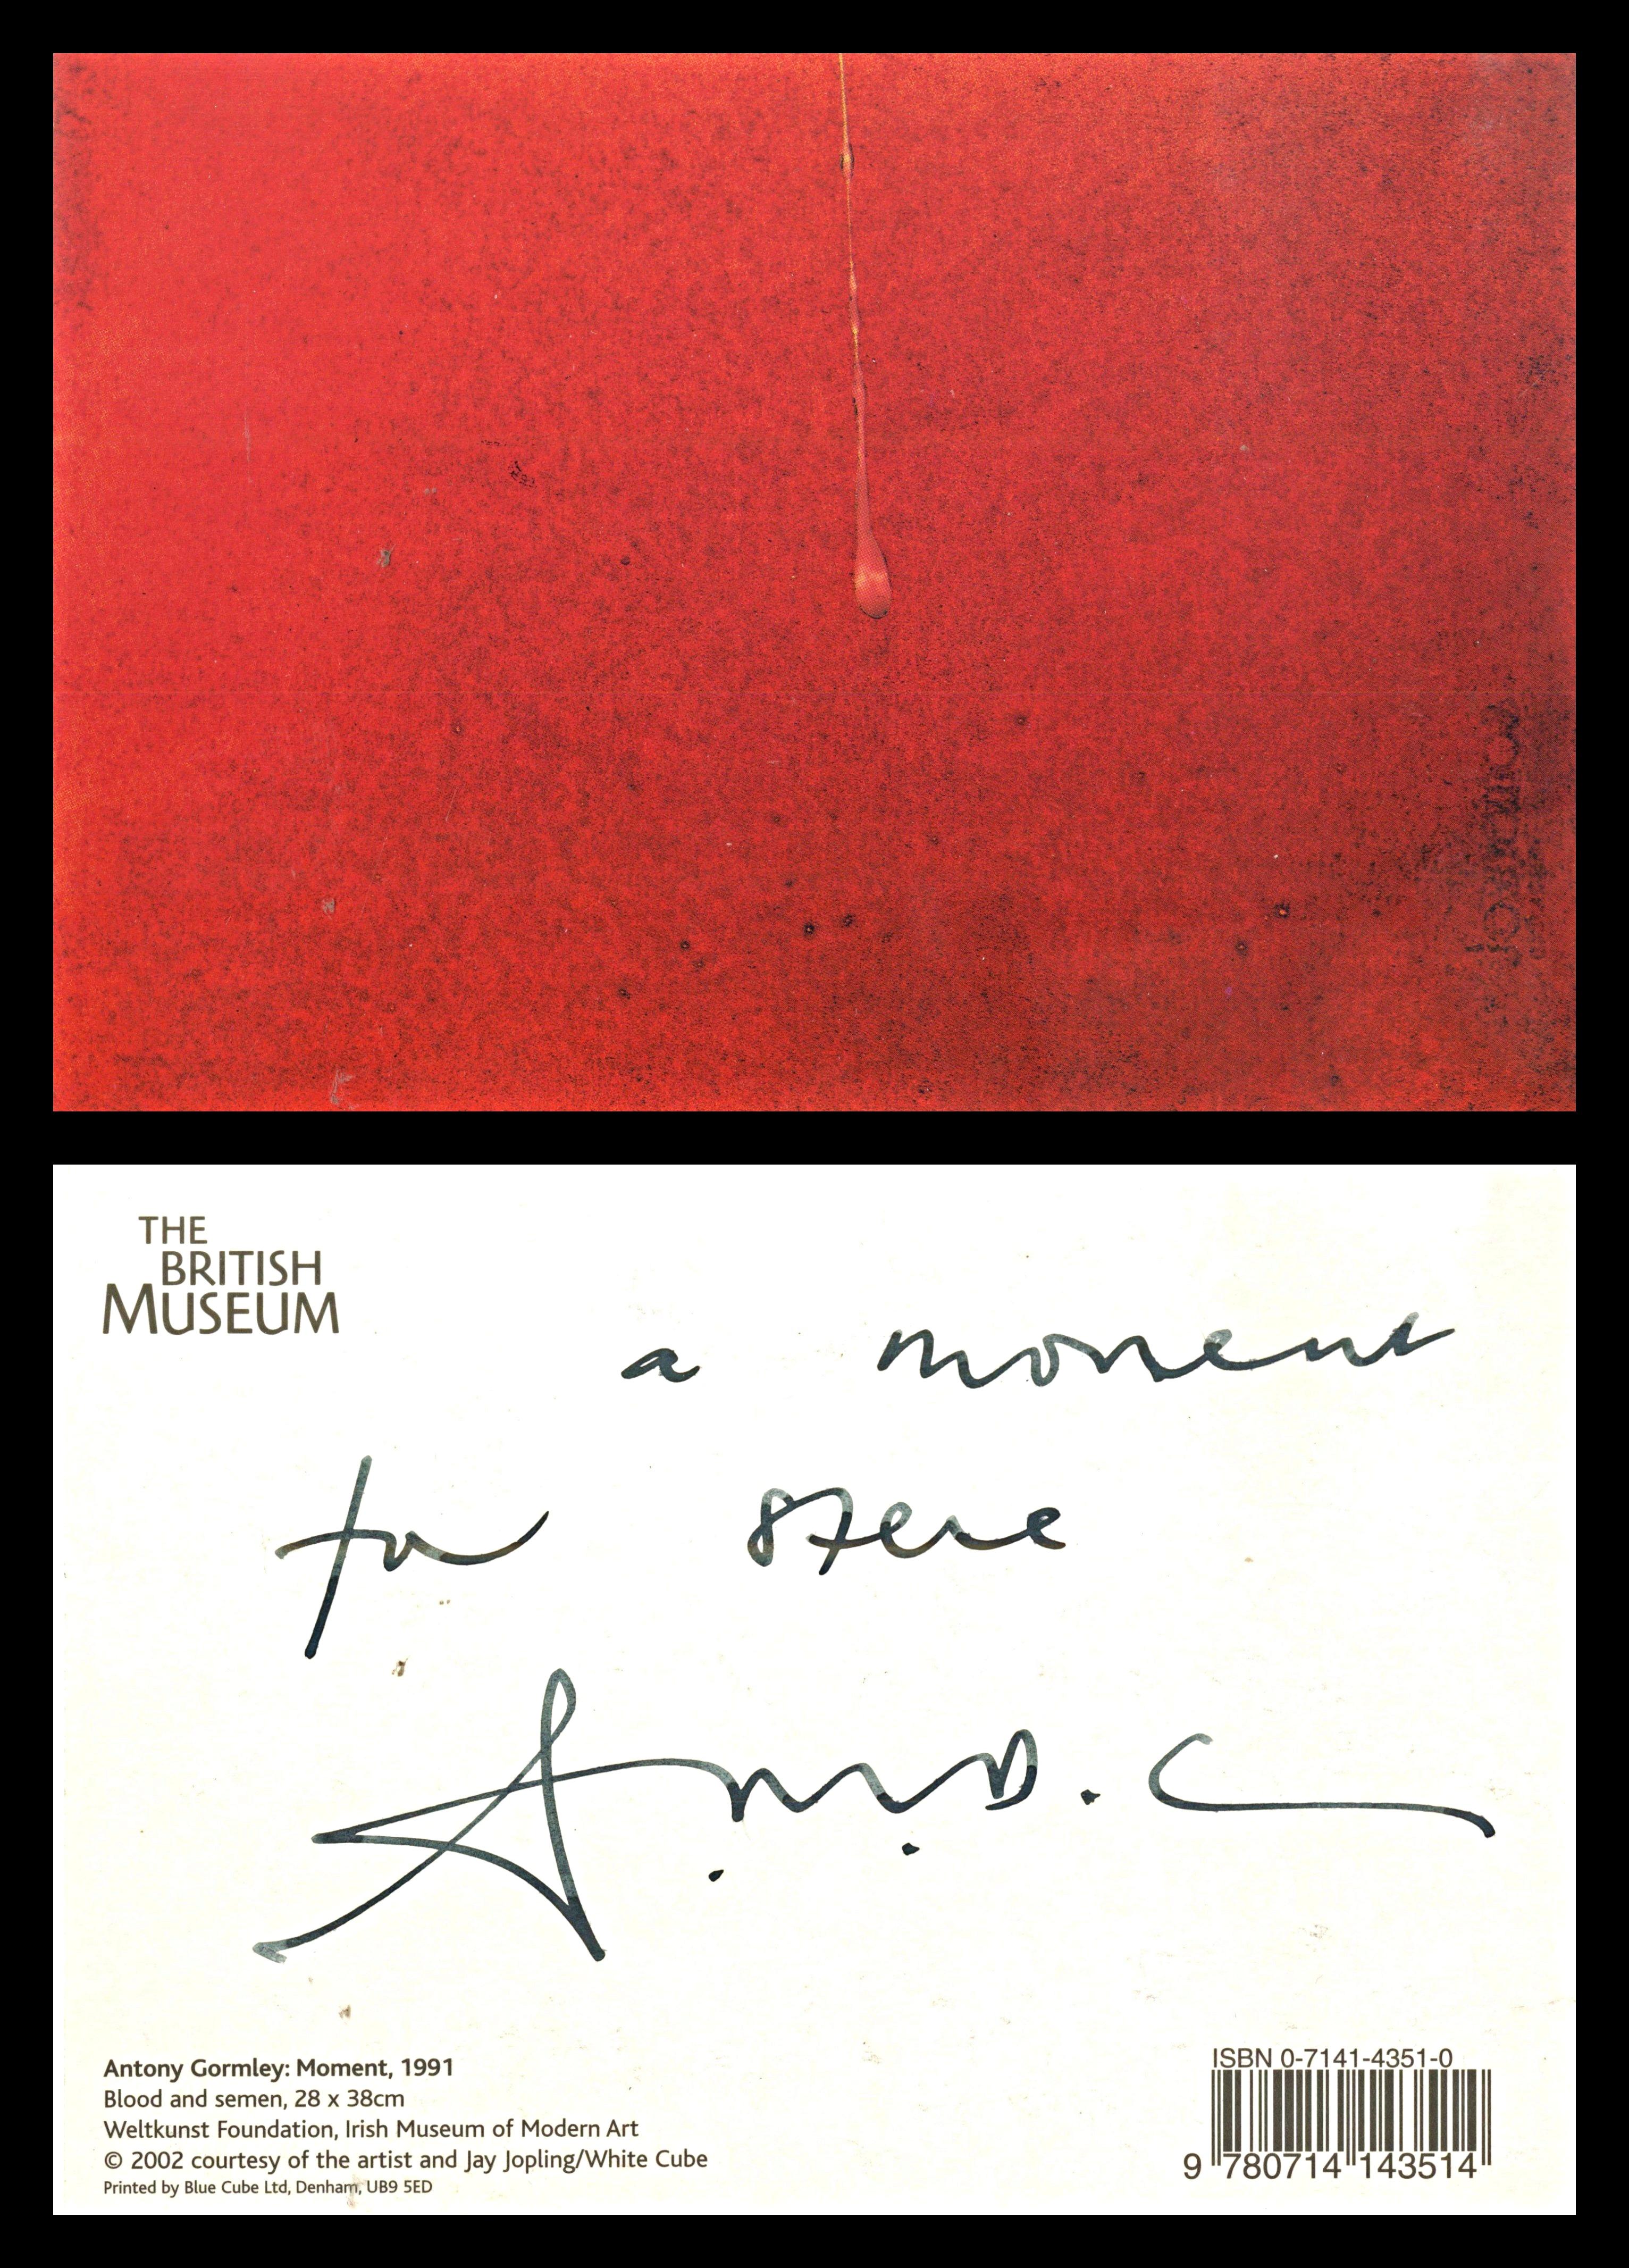 A Moment for Steve (Hand Signed and Inscribed postcard) - Art by Antony Gormley